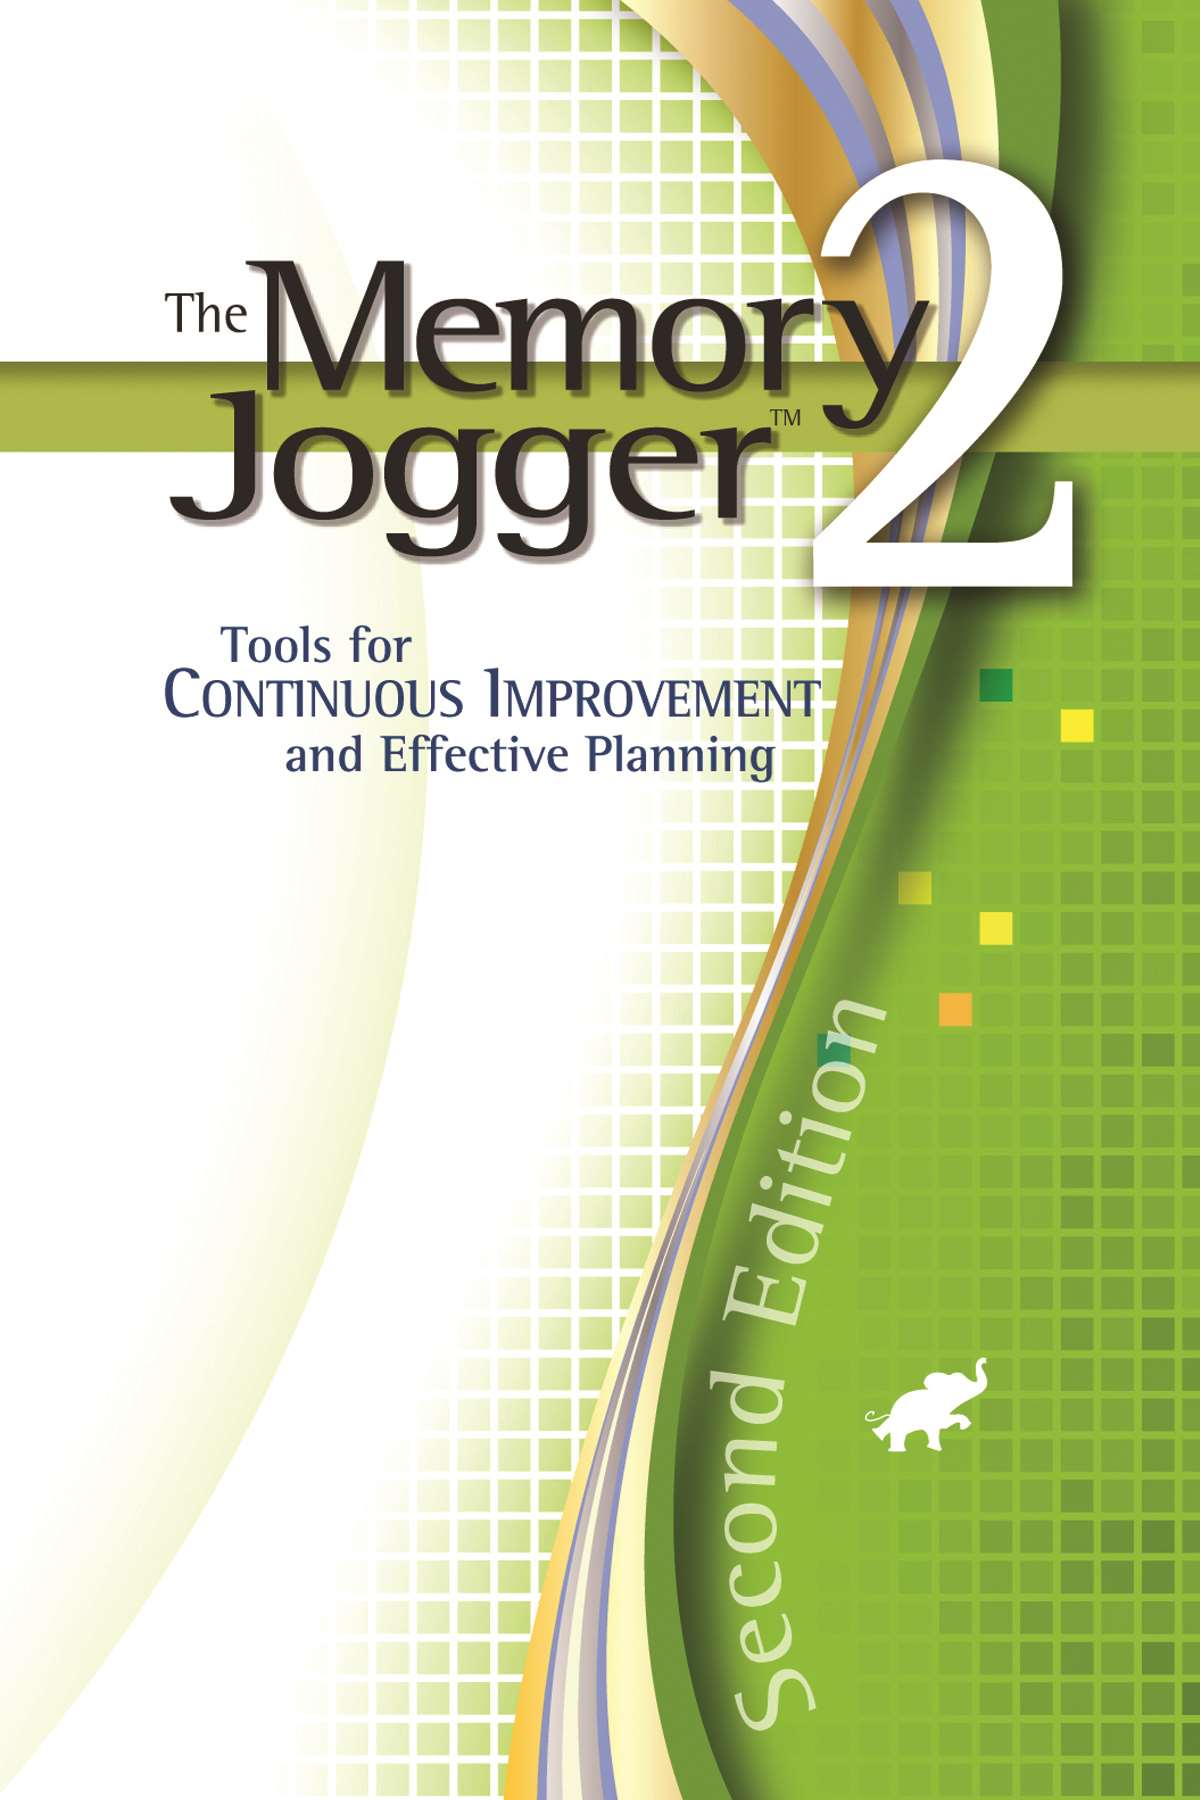 The Memory Jogger 2, Second Edition